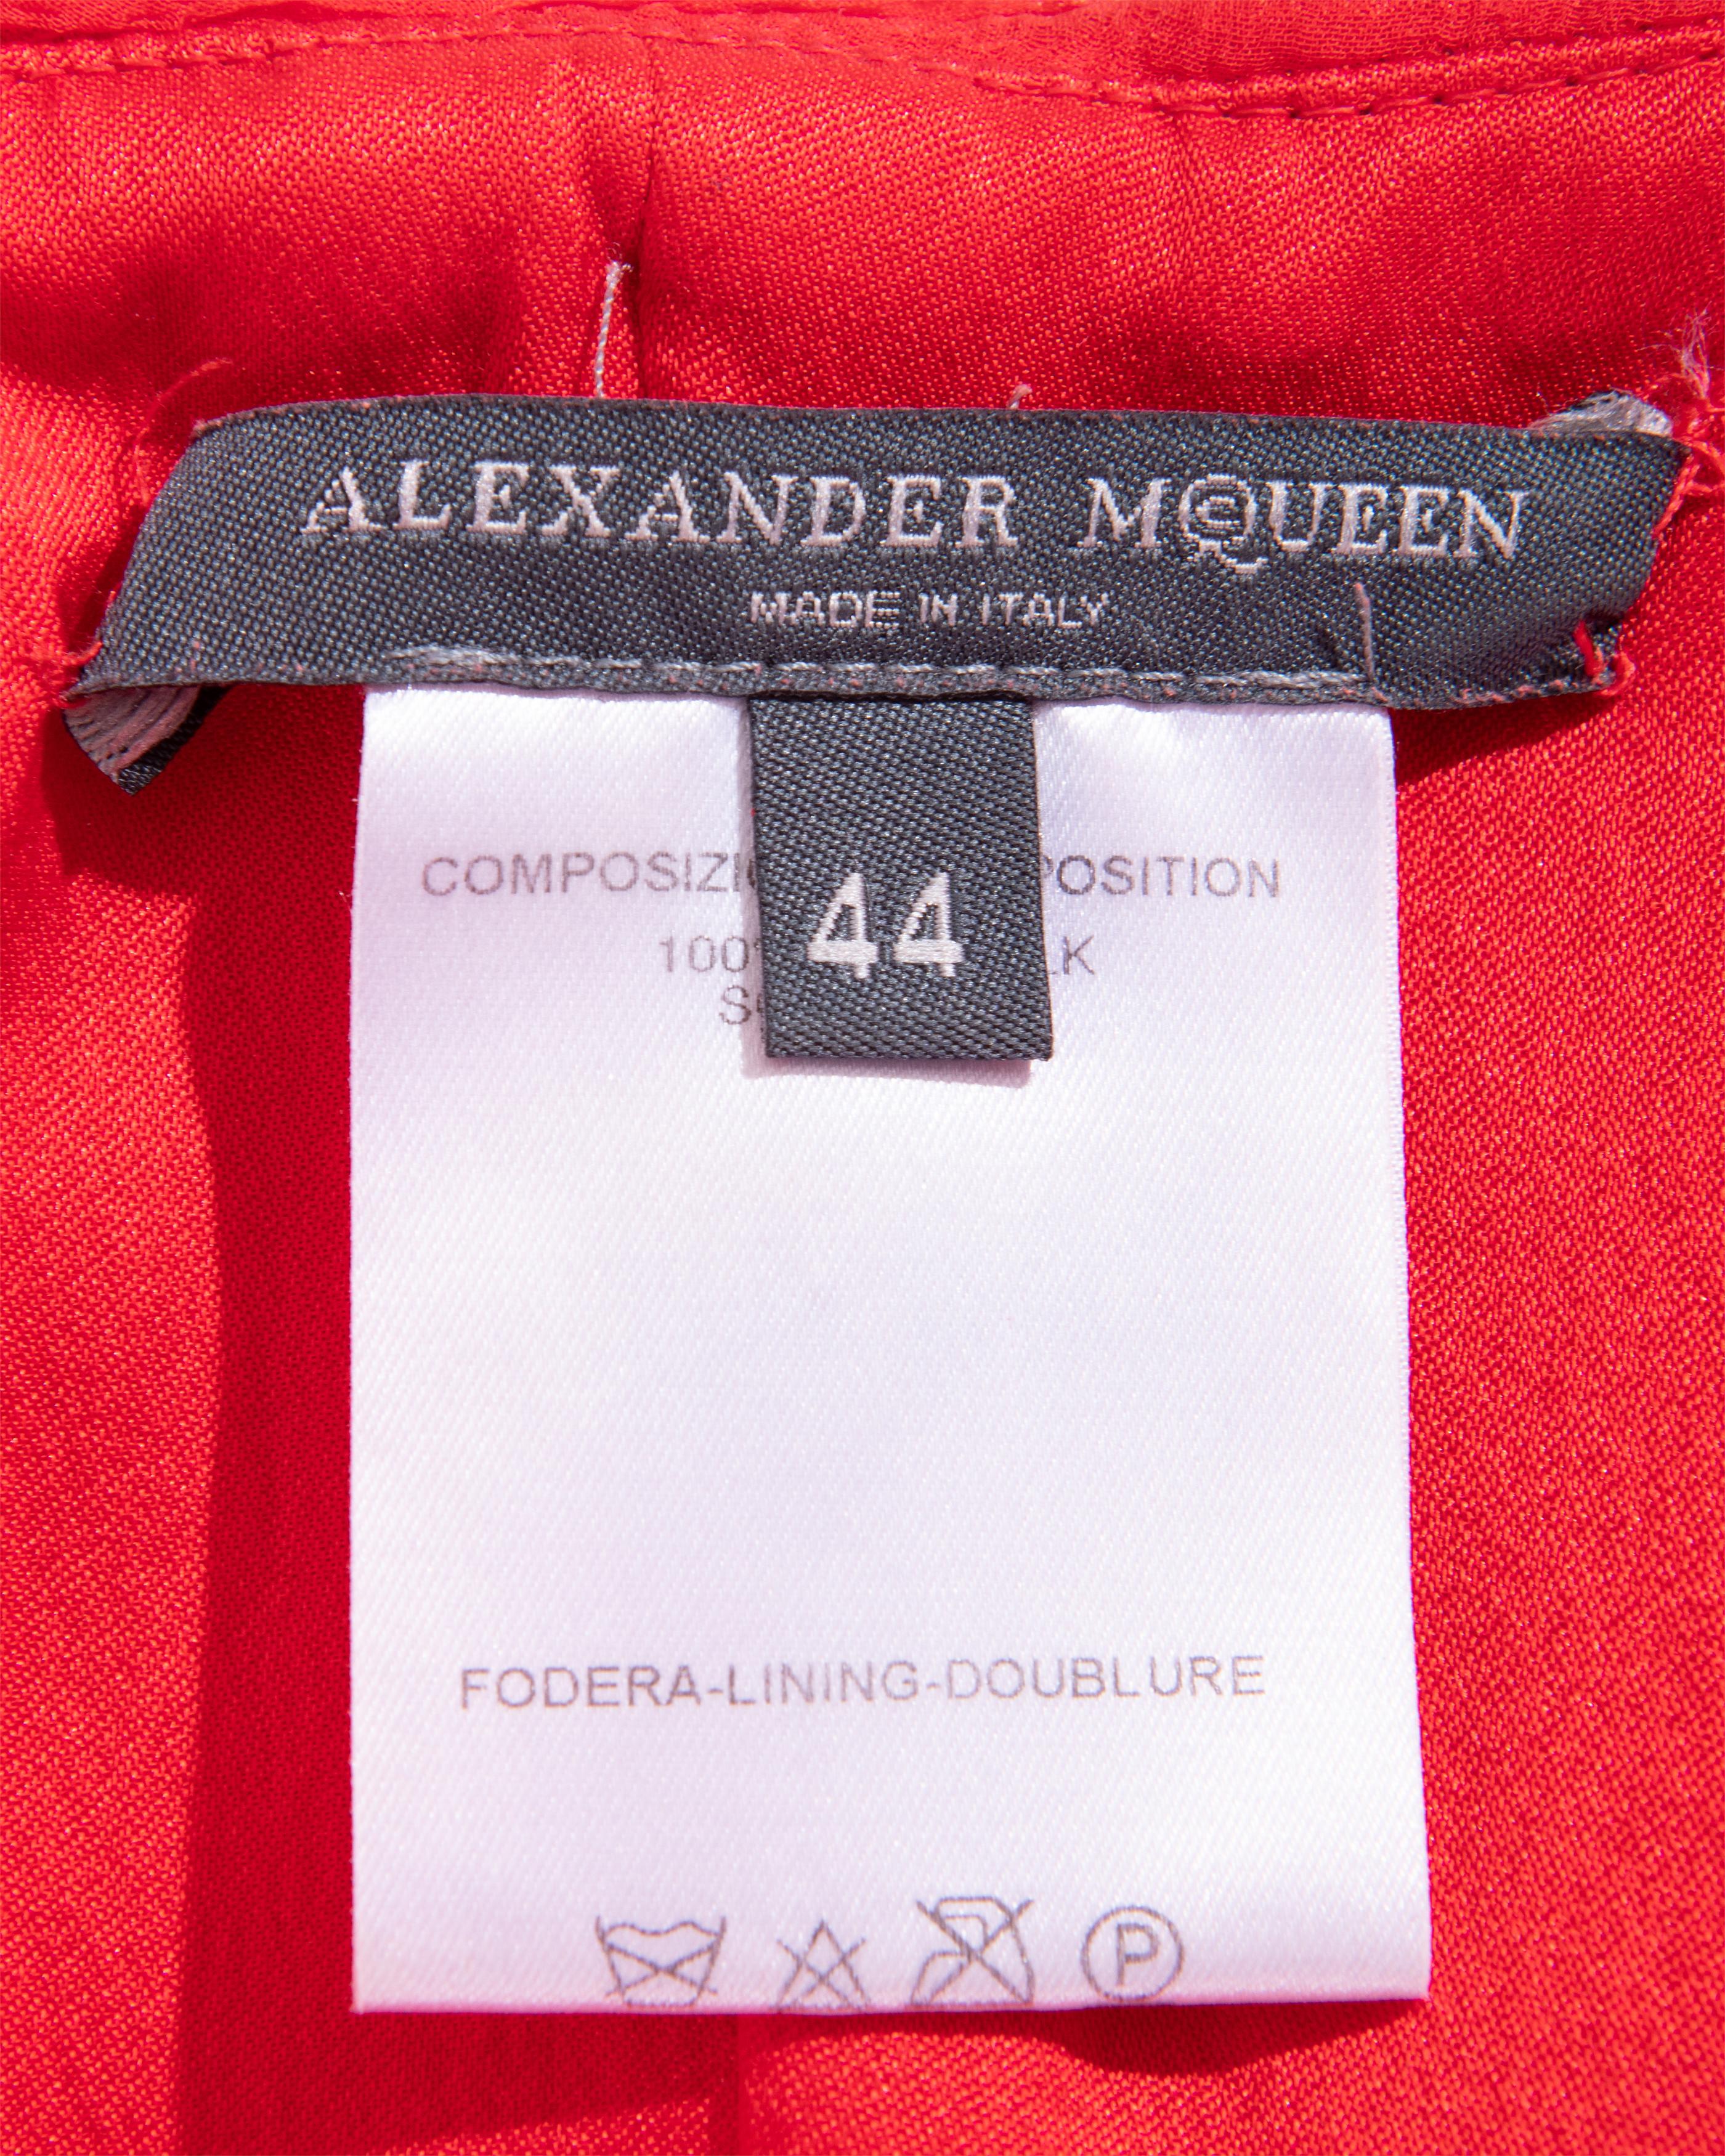 S/S 2003 Alexander McQueen  'Irere' Collection Red Silk Chiffon Gown with Sash For Sale 15